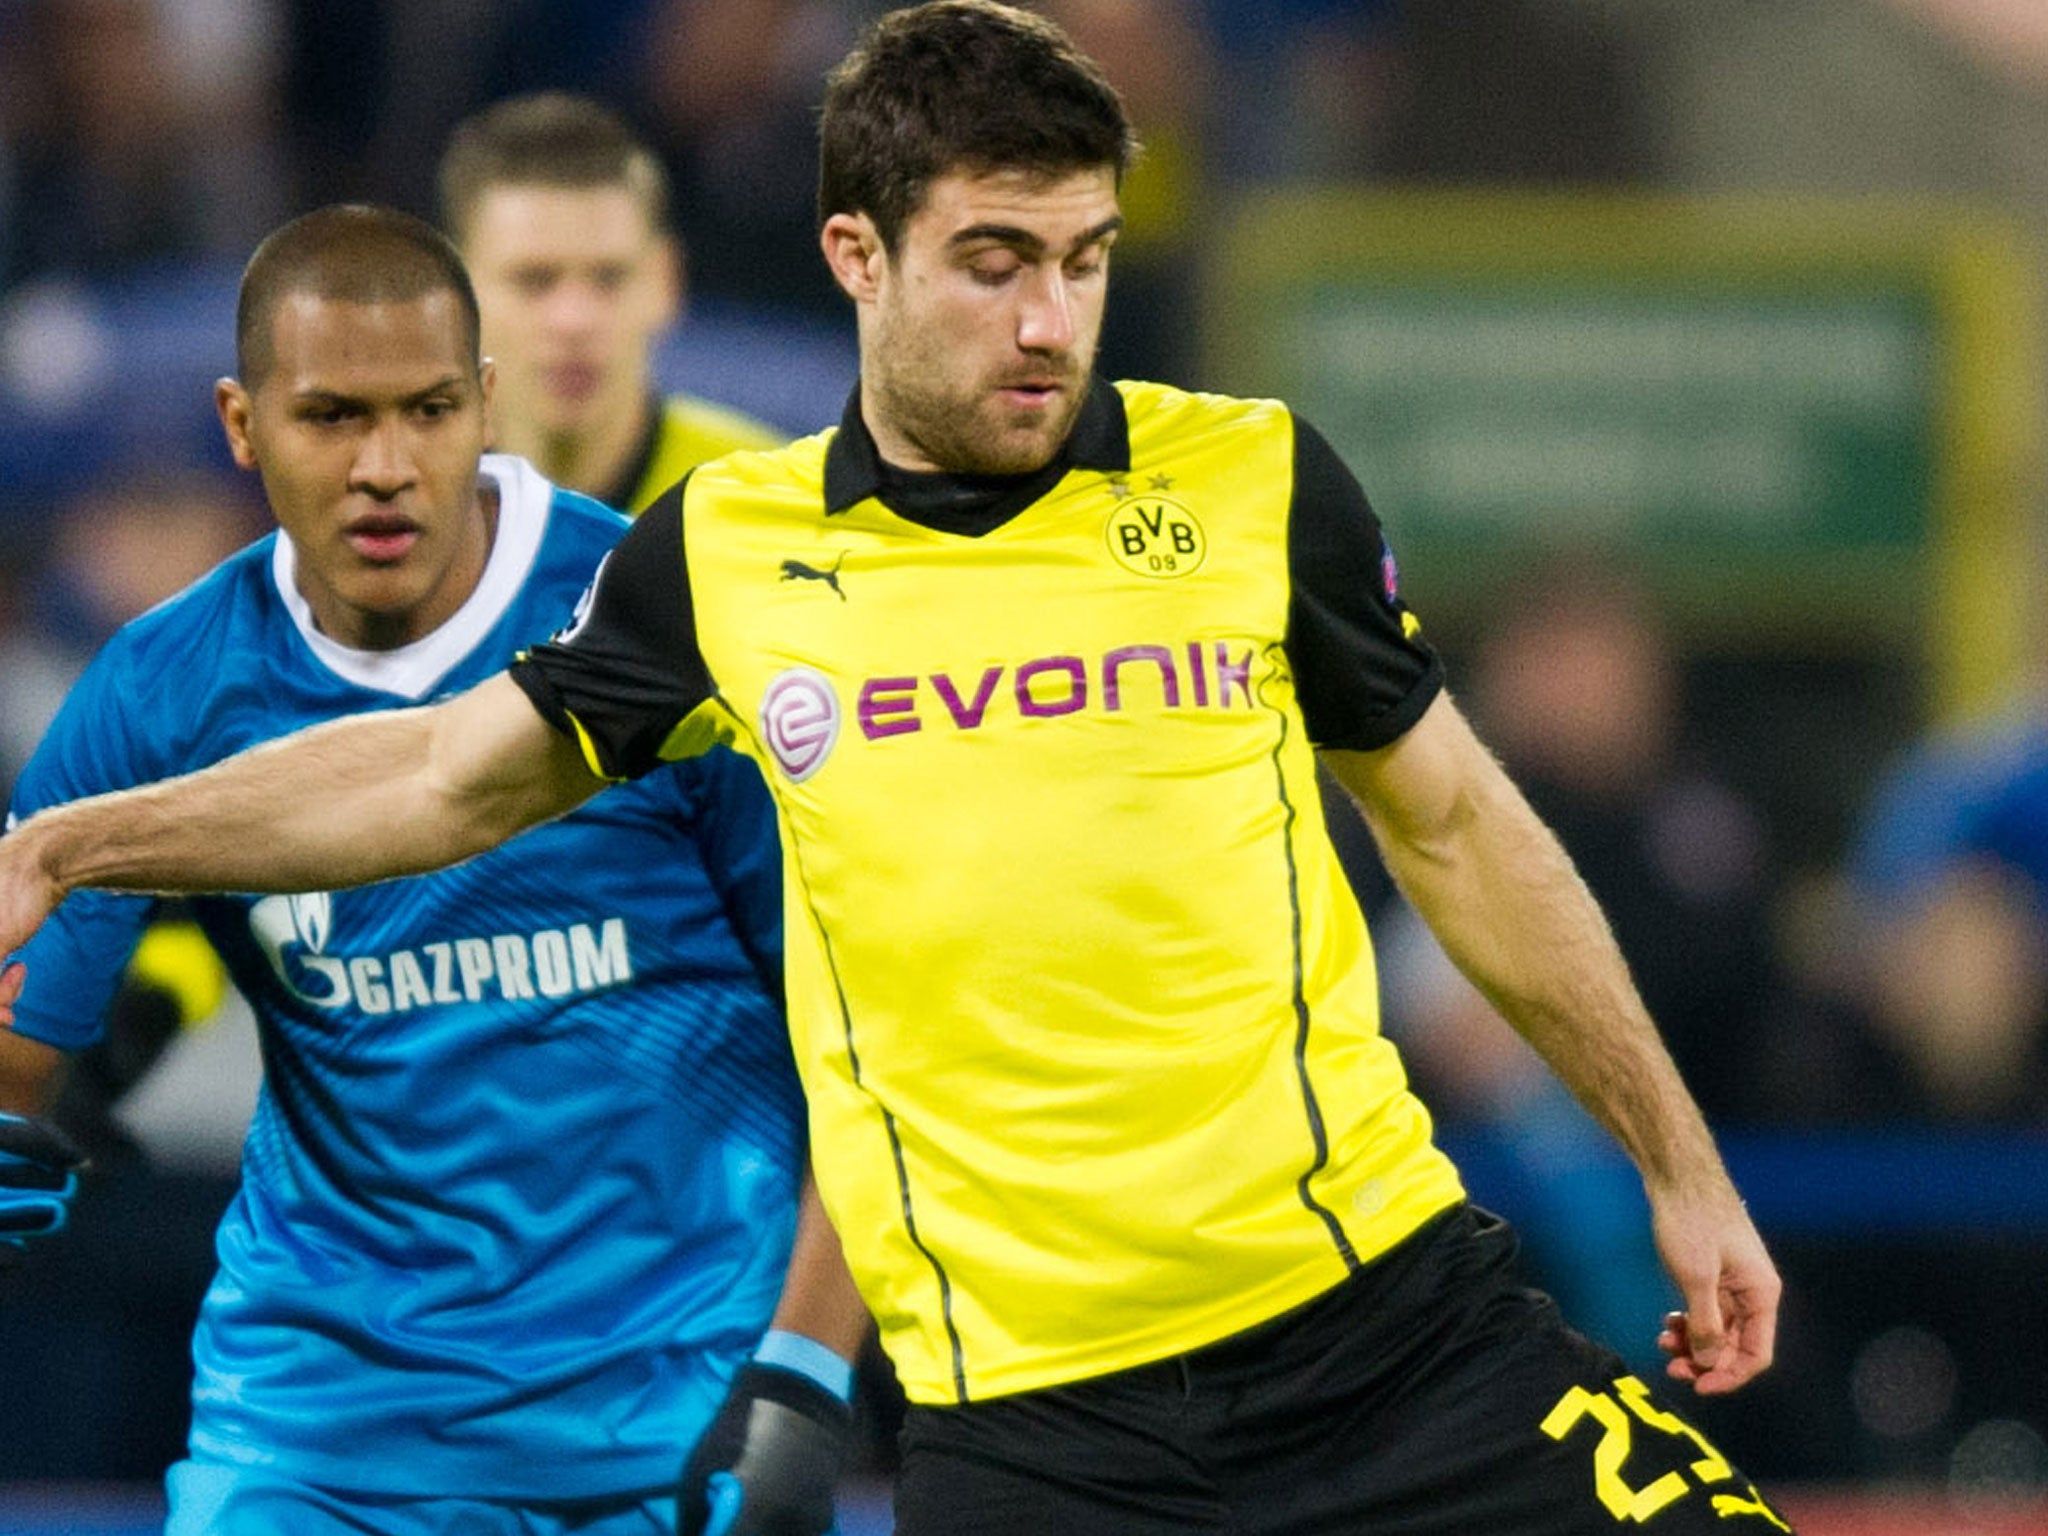 World Cup 2014: Player profile is Sokratis Papastathopoulos, the Greece midfielder?